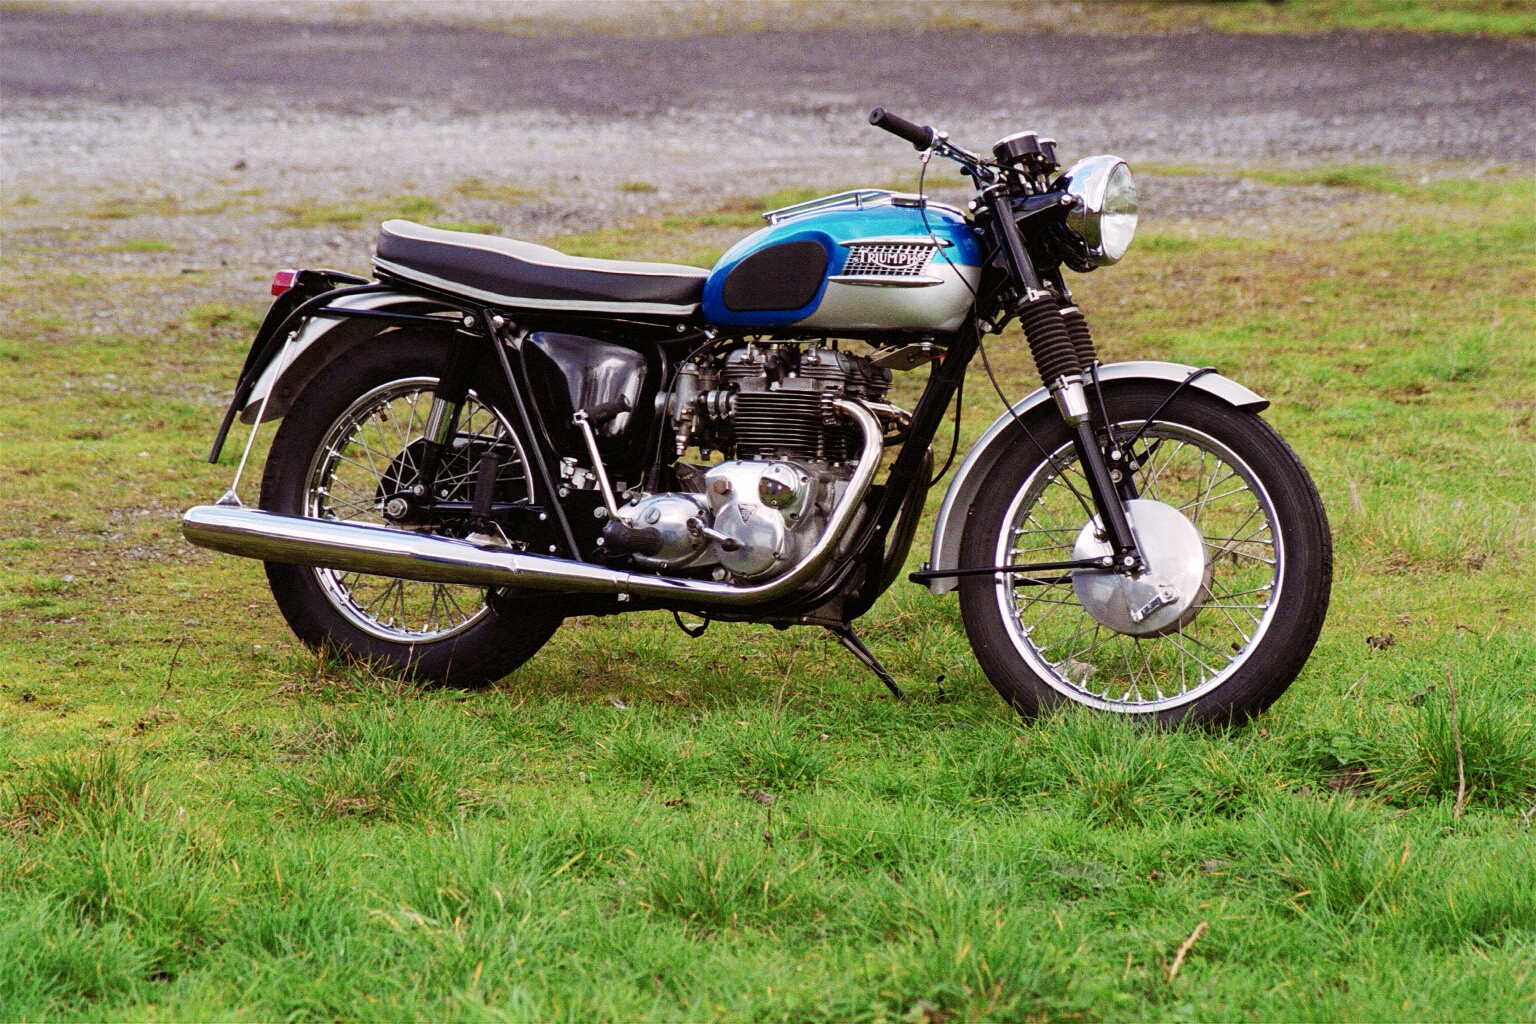 The original 1965 prototype Triumph Trident created by Bert Hopwood and Doug Hele. (Picture courtesy Wikipedia).